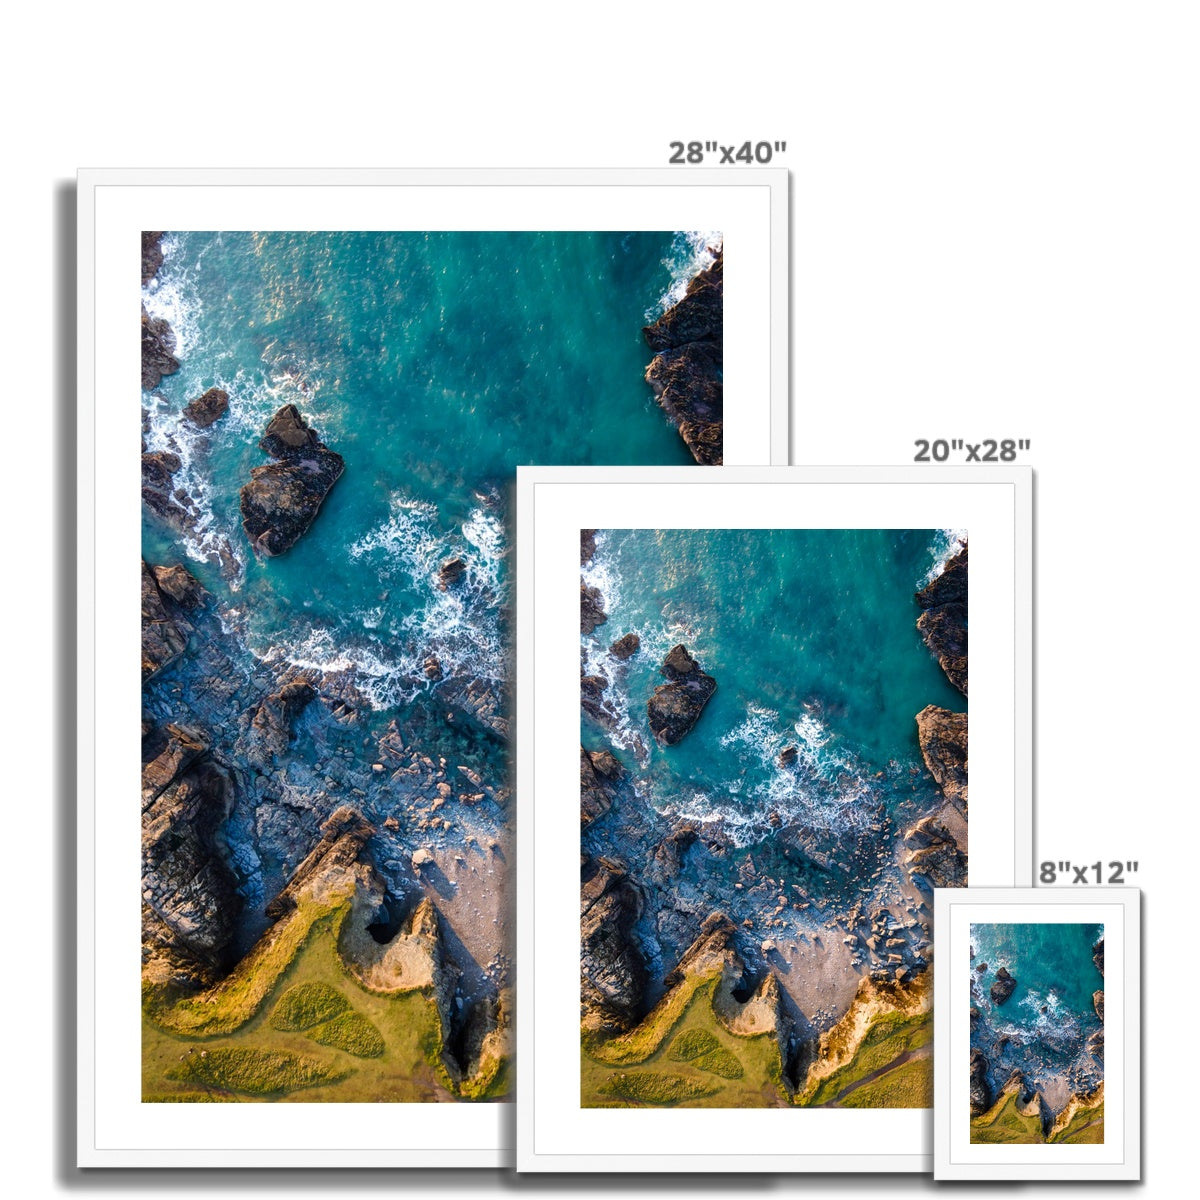 godrevy from above wooden frame sizes